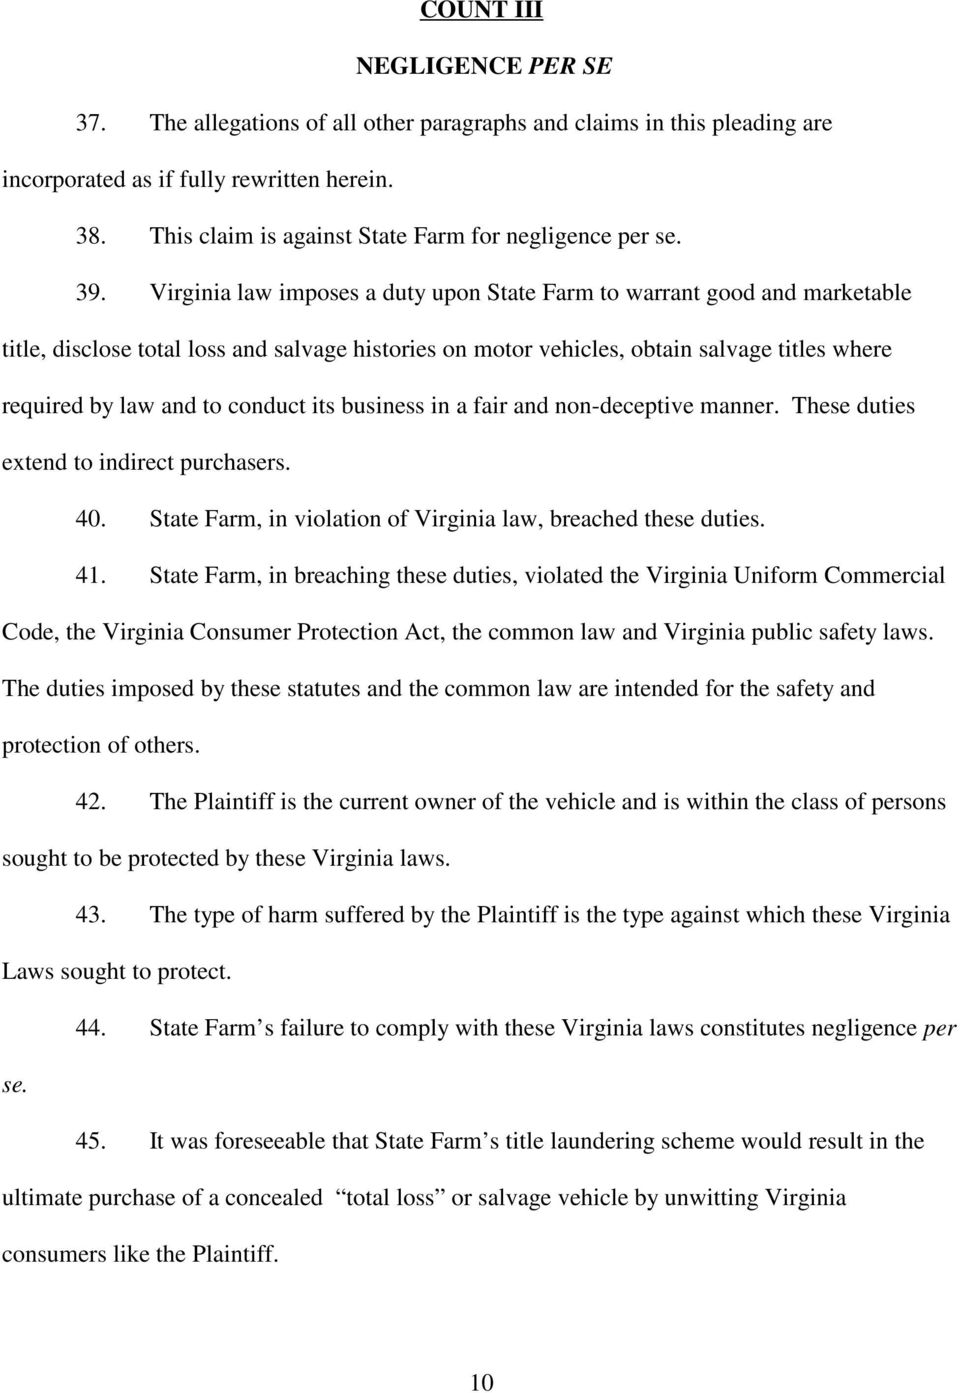 Virginia law imposes a duty upon State Farm to warrant good and marketable title, disclose total loss and salvage histories on motor vehicles, obtain salvage titles where required by law and to